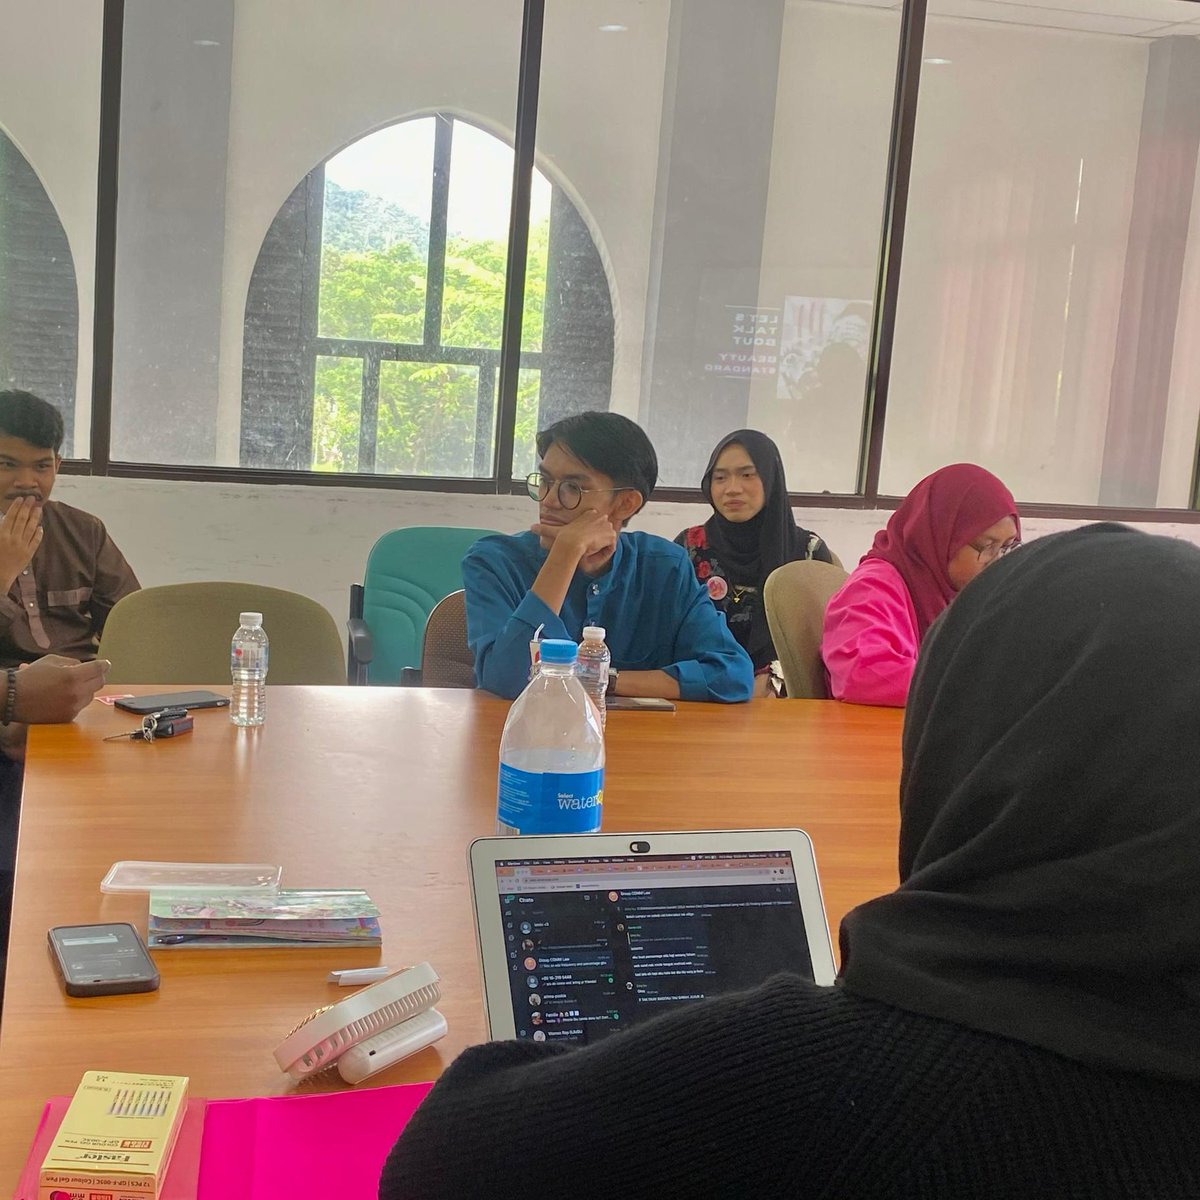 A SESSION WITH IIUM WOMEN REPRESENTATIVES

This morning, I spent my time with the Iron Women of IIUM! Shespeaks, an initiative by IIUMSU to empower the voices of women.